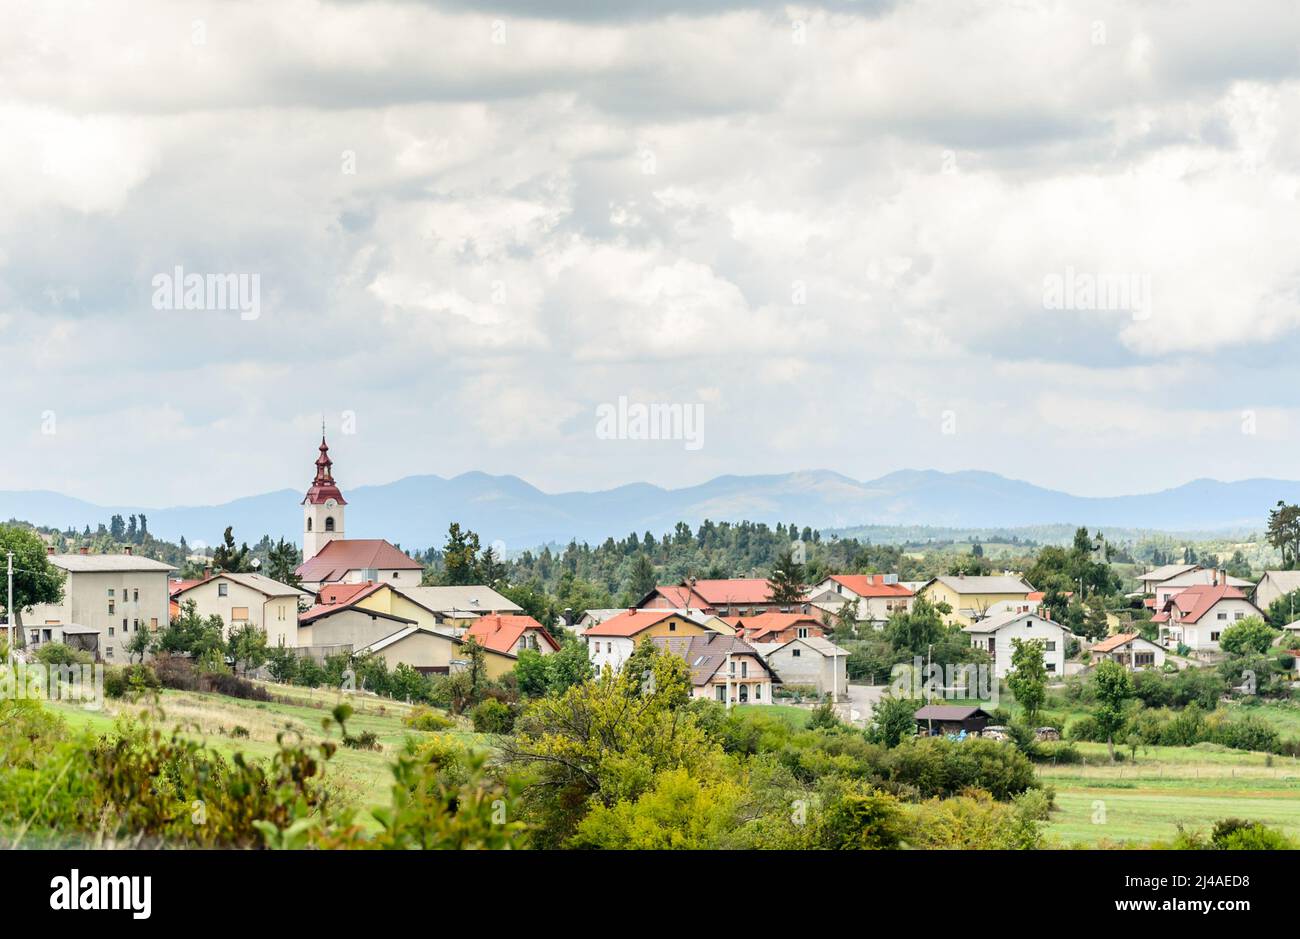 Beautiful Landscape in Slovenian Countryside. Picturesque Village with Traditional Cottages and a Church with Belfry in a Natural Environment with Tre Stock Photo